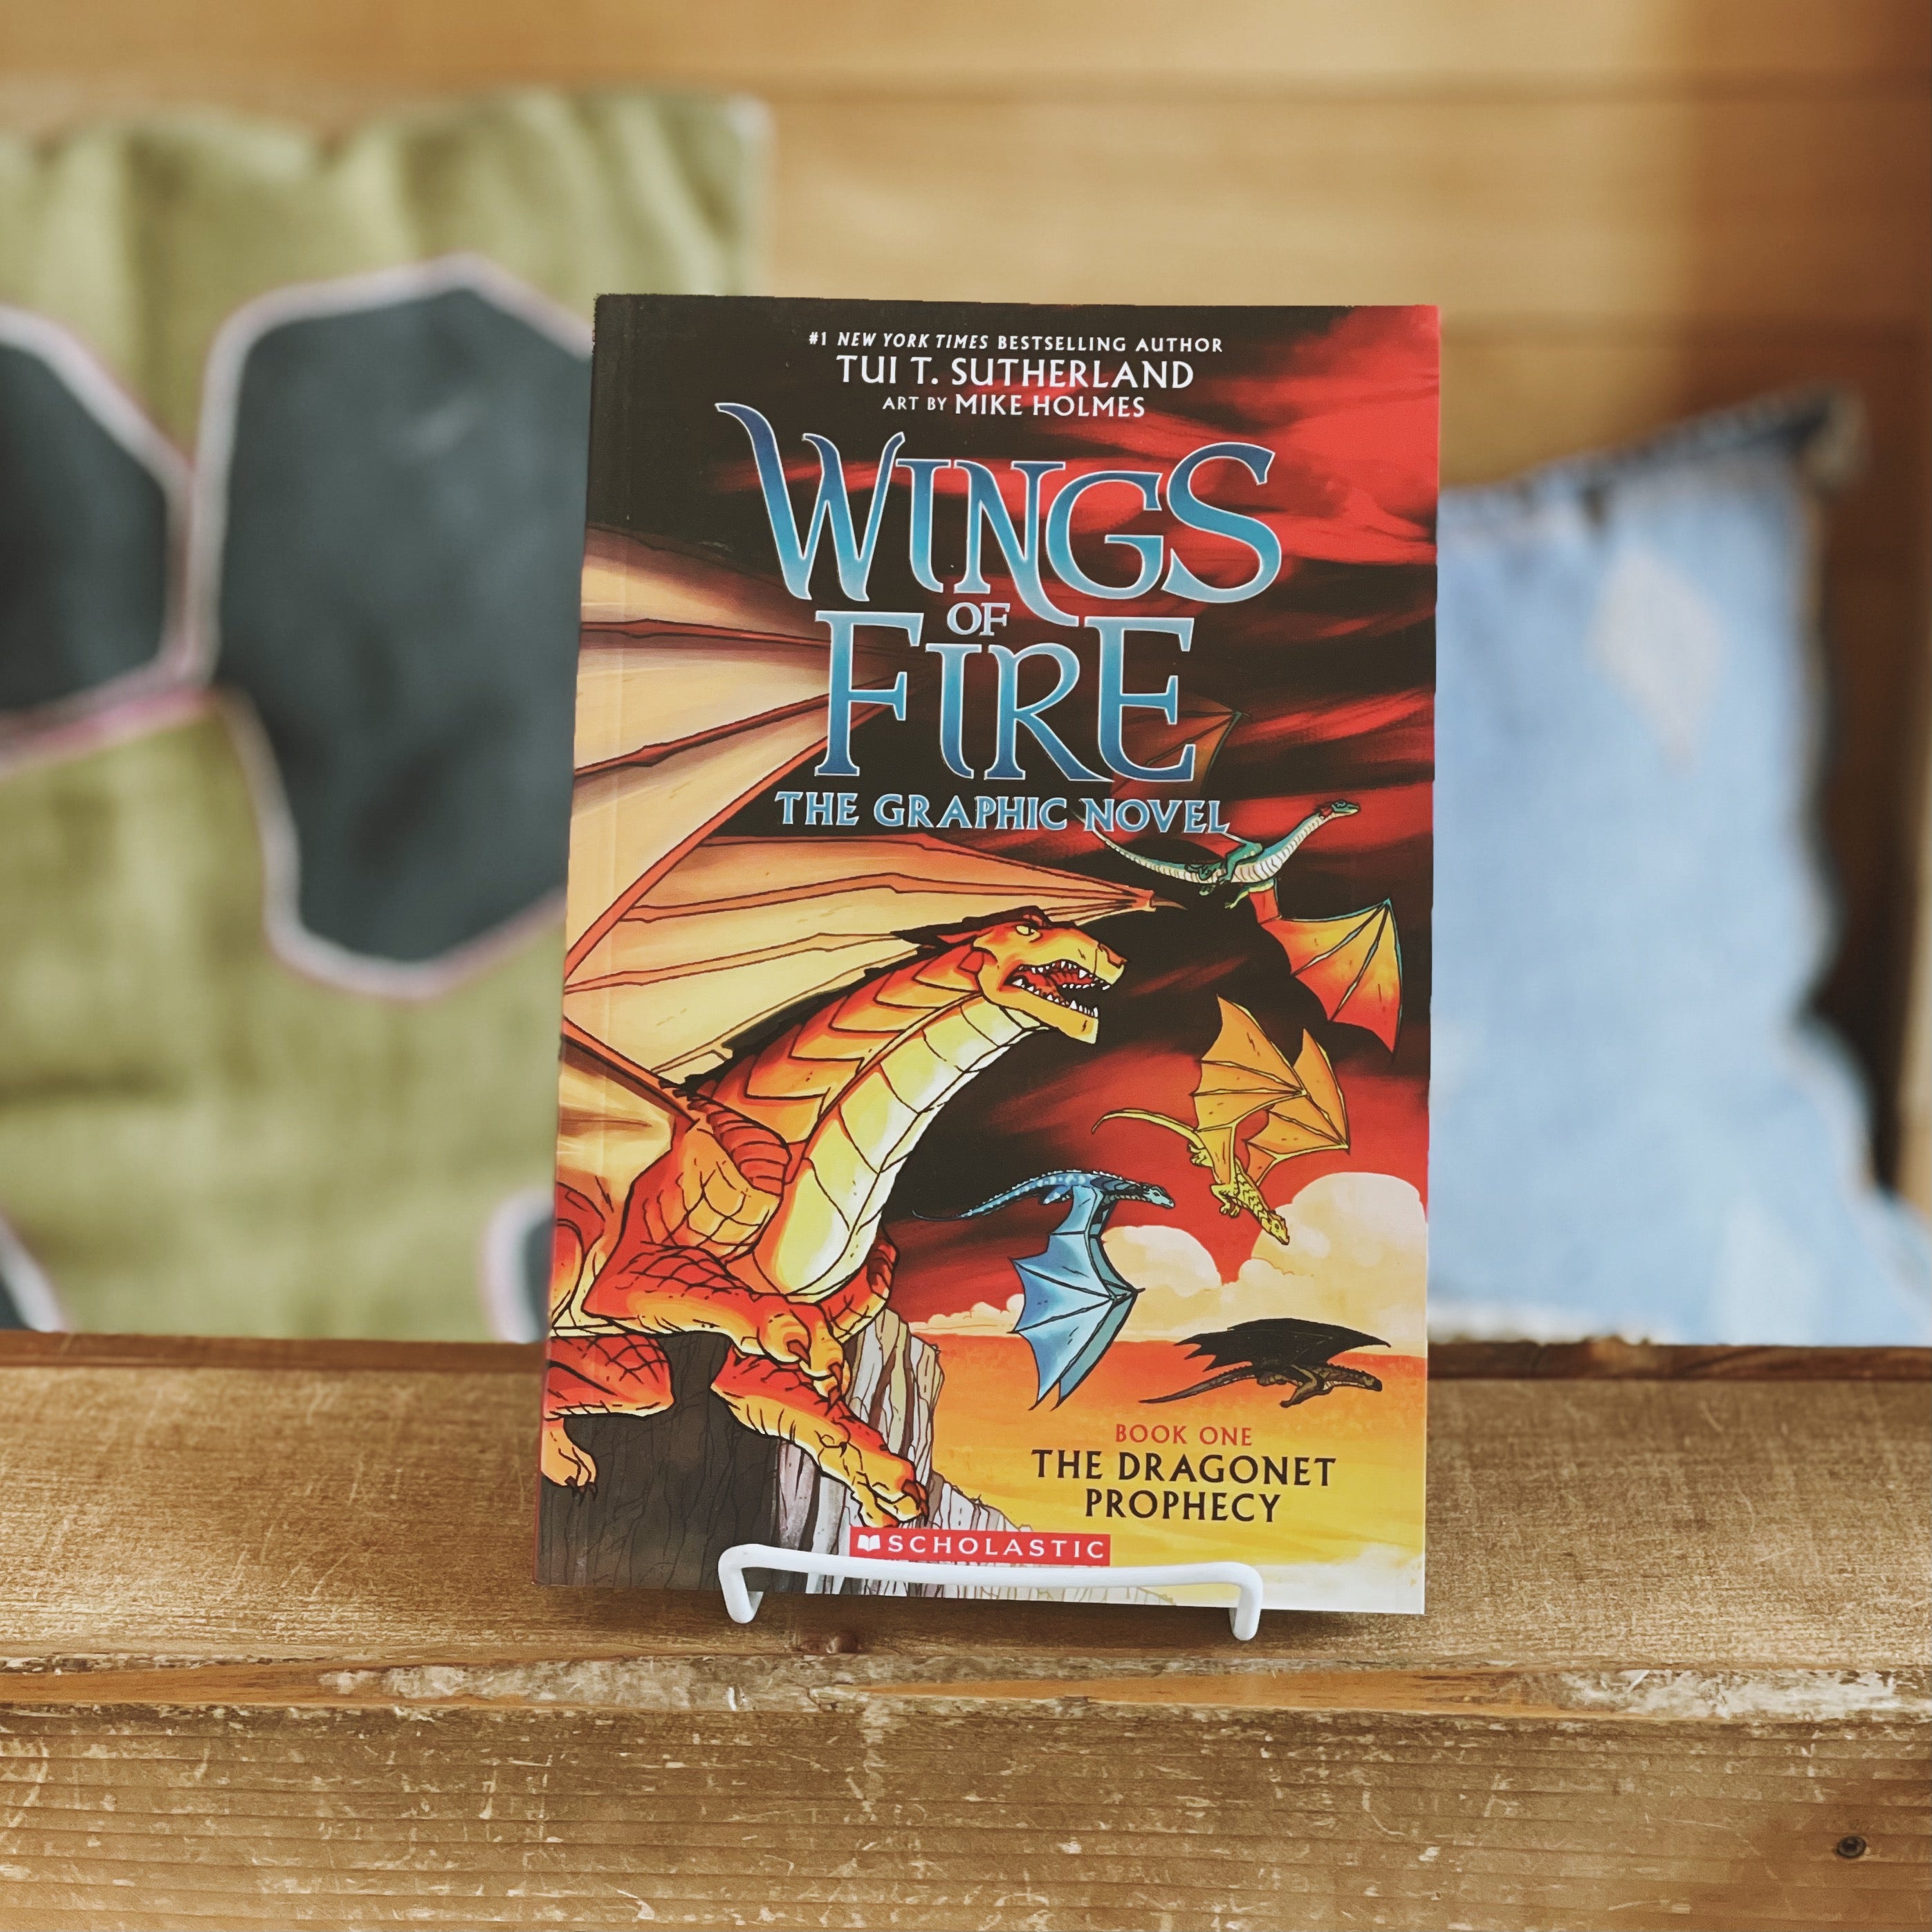 Wings of Fire: The Dragonet Prophecy: A Graphic Novel (Wings of Fire Graphic Novel #1)